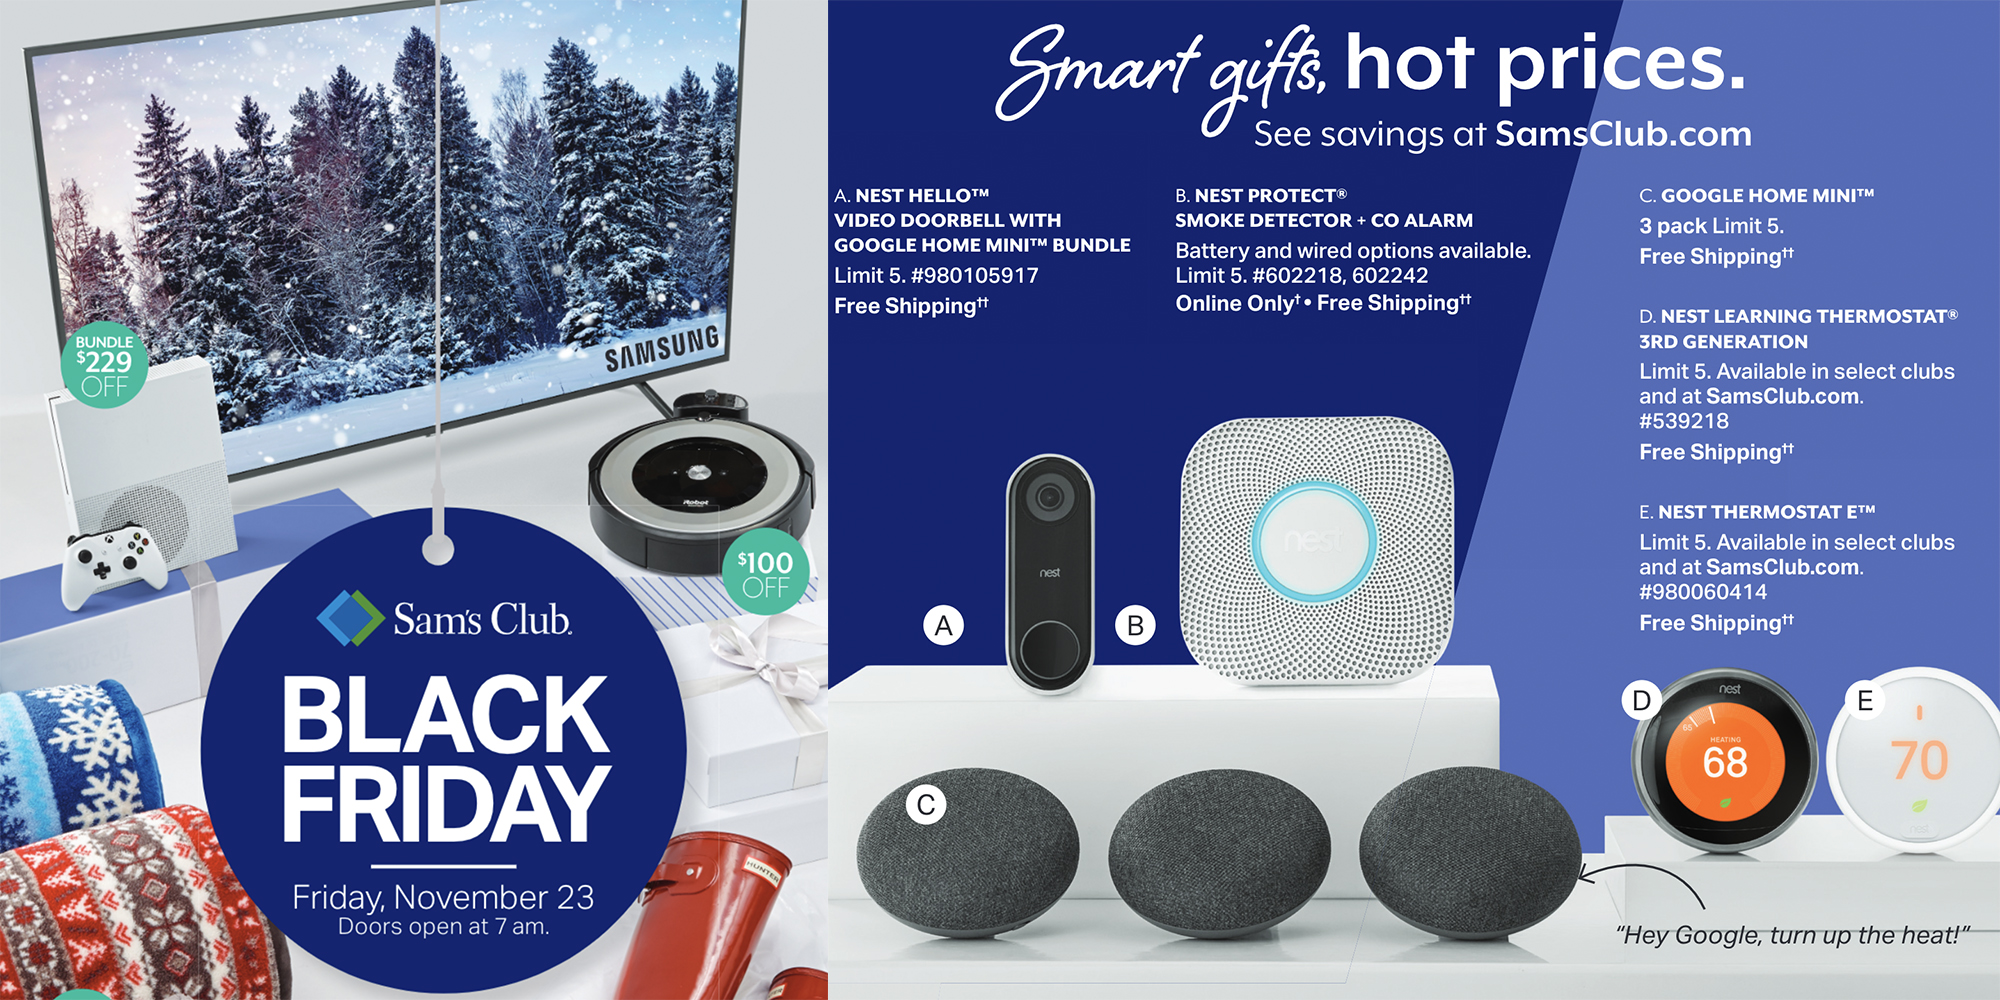 Sam's Club Black Friday ad: Deals on Nest, TVs, and more - 9to5Toys